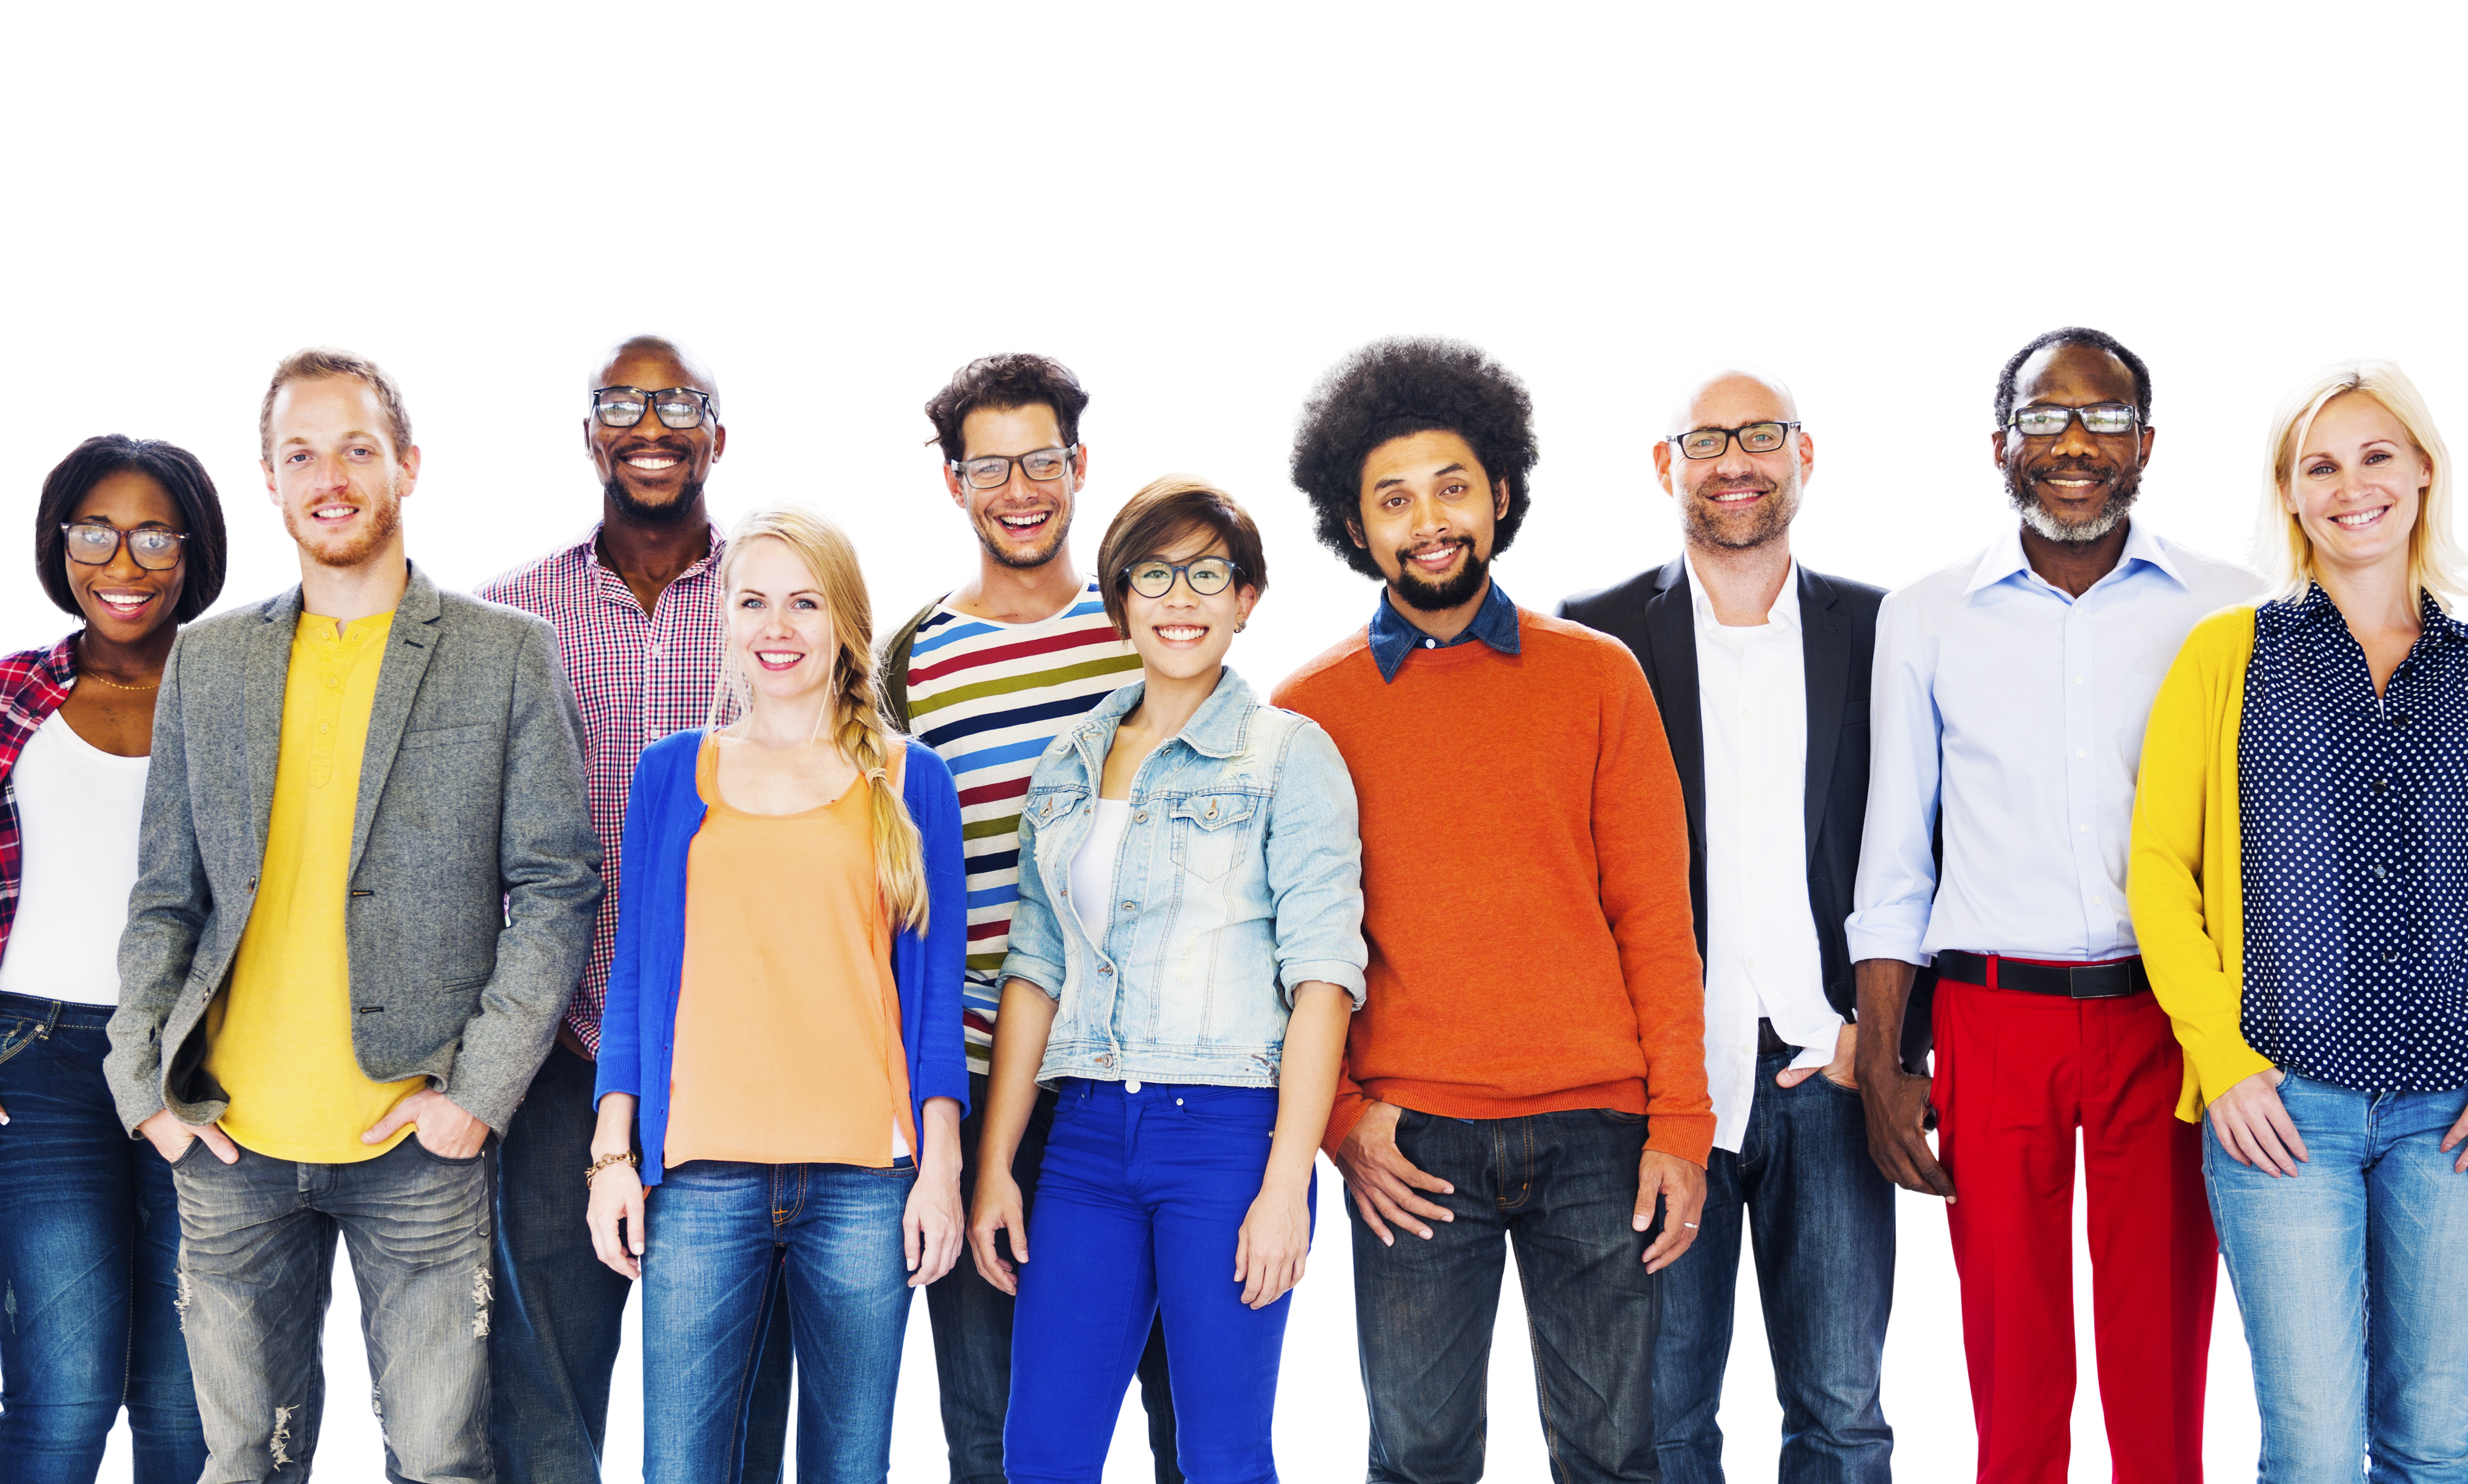 A group of people of different sexes, race, and identity standing side by side